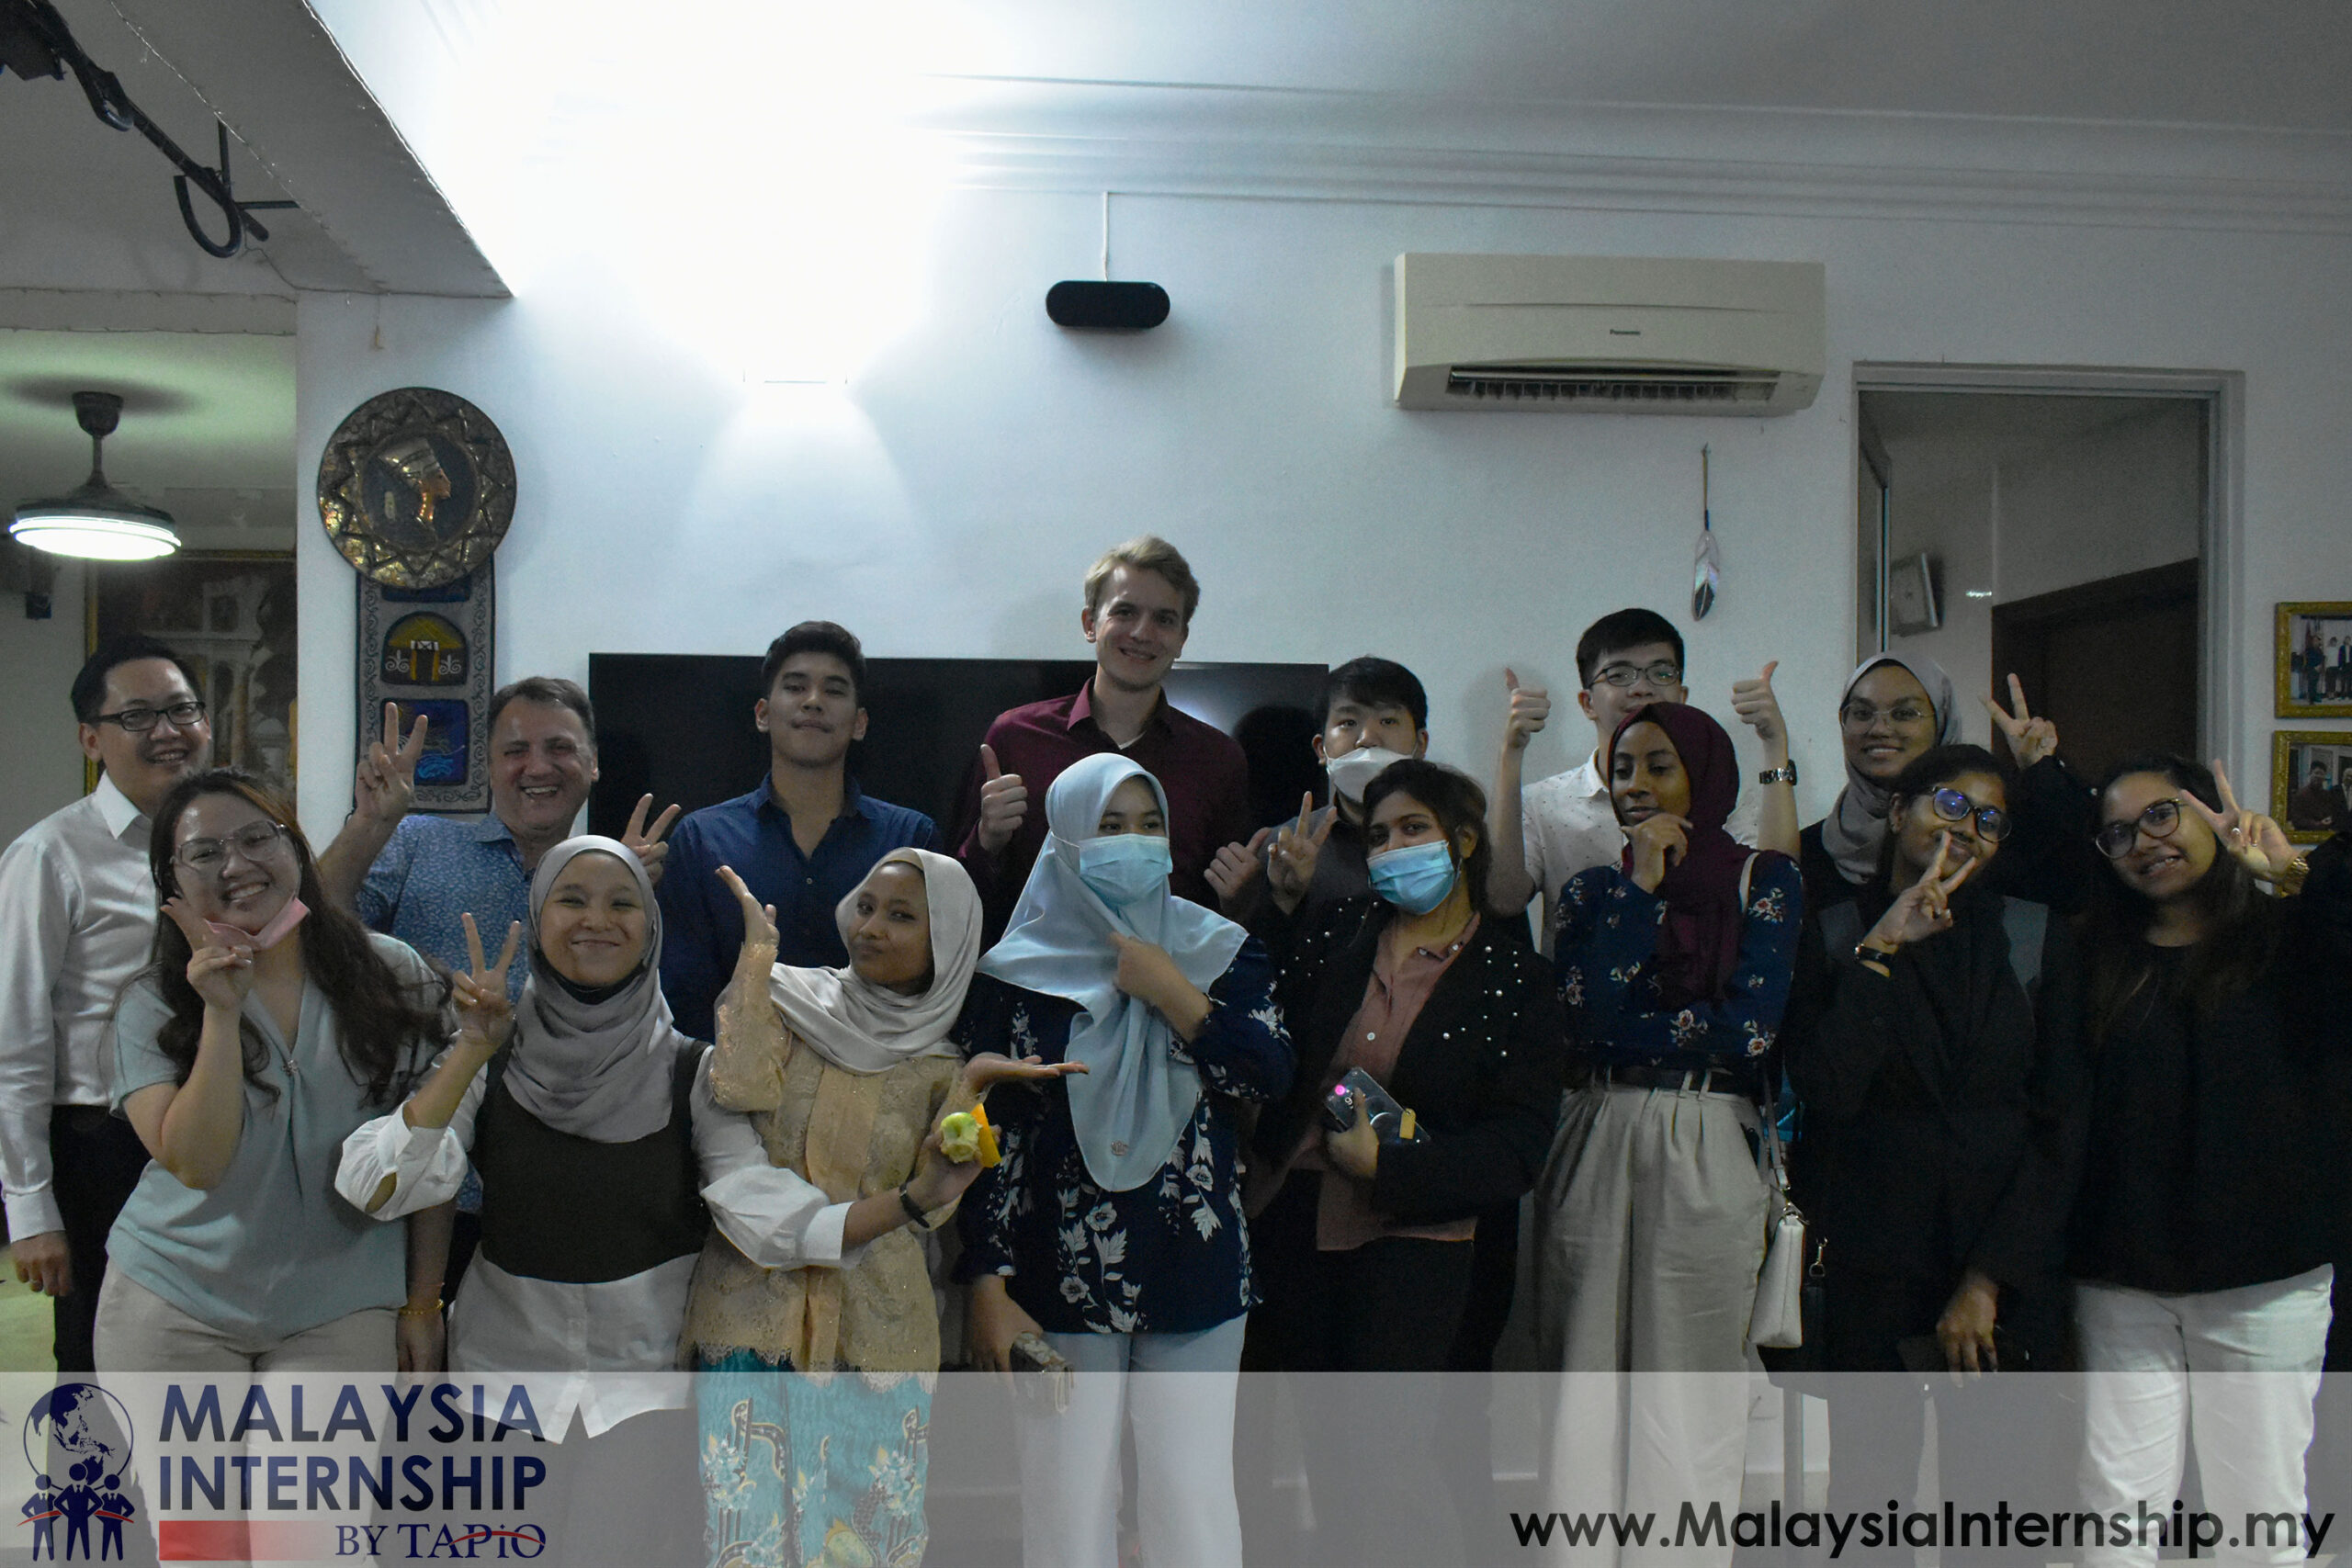 Malaysia Internship Programme for Leaders by TAPiO held the Speakers Club themed "Unity". This week's TSC's session was an interesting one.